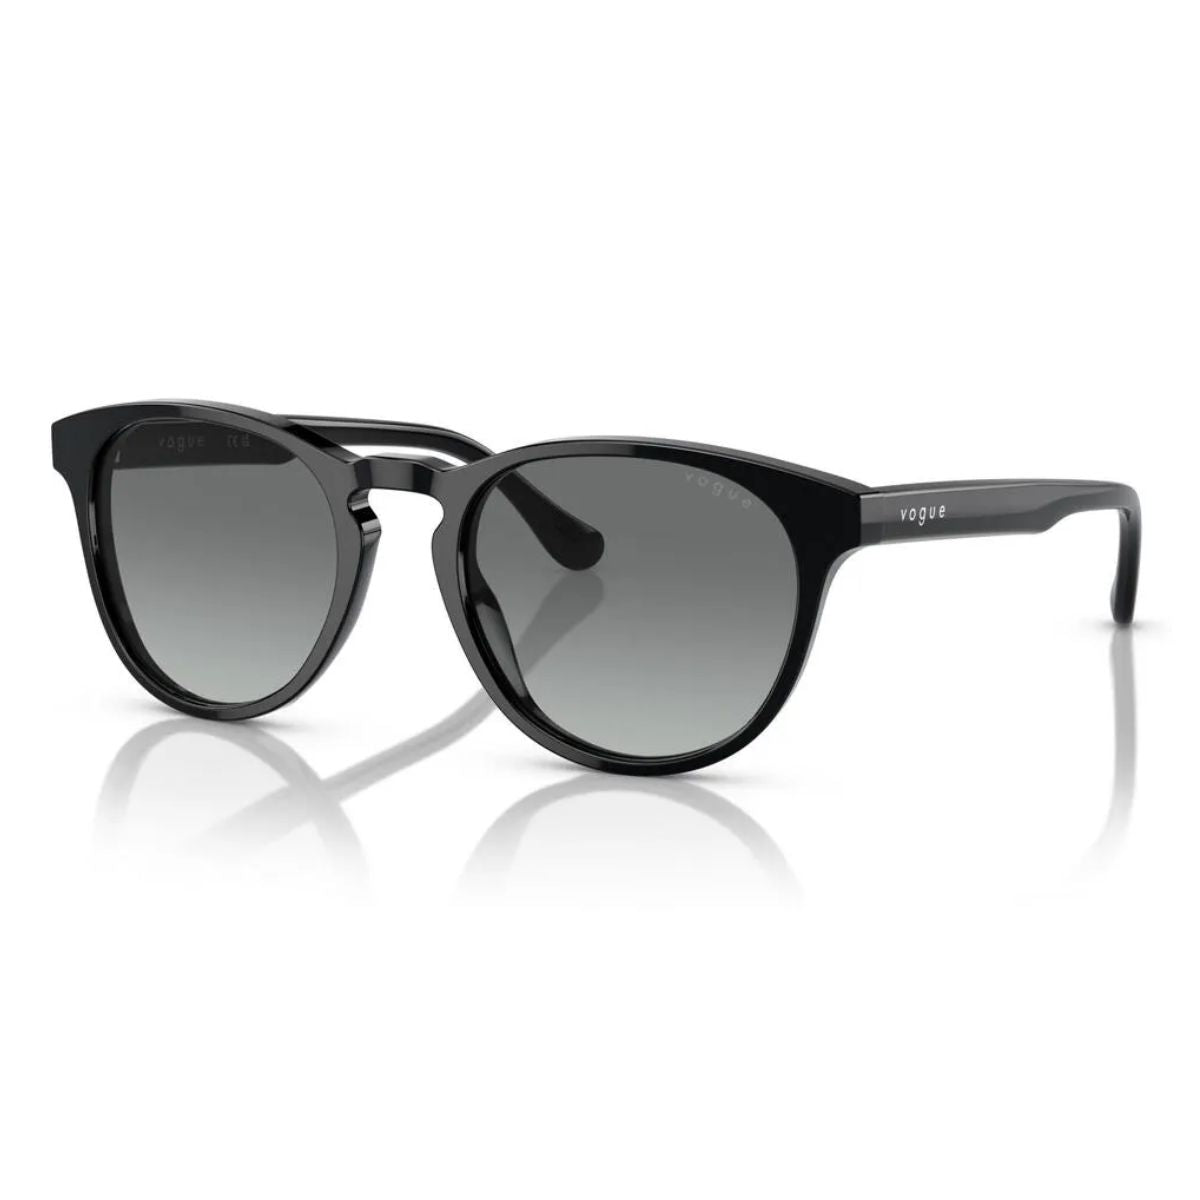 "Shop Stylish Vogue 5536 UV Protection Sunglasses For Women's At Online | Optorium"